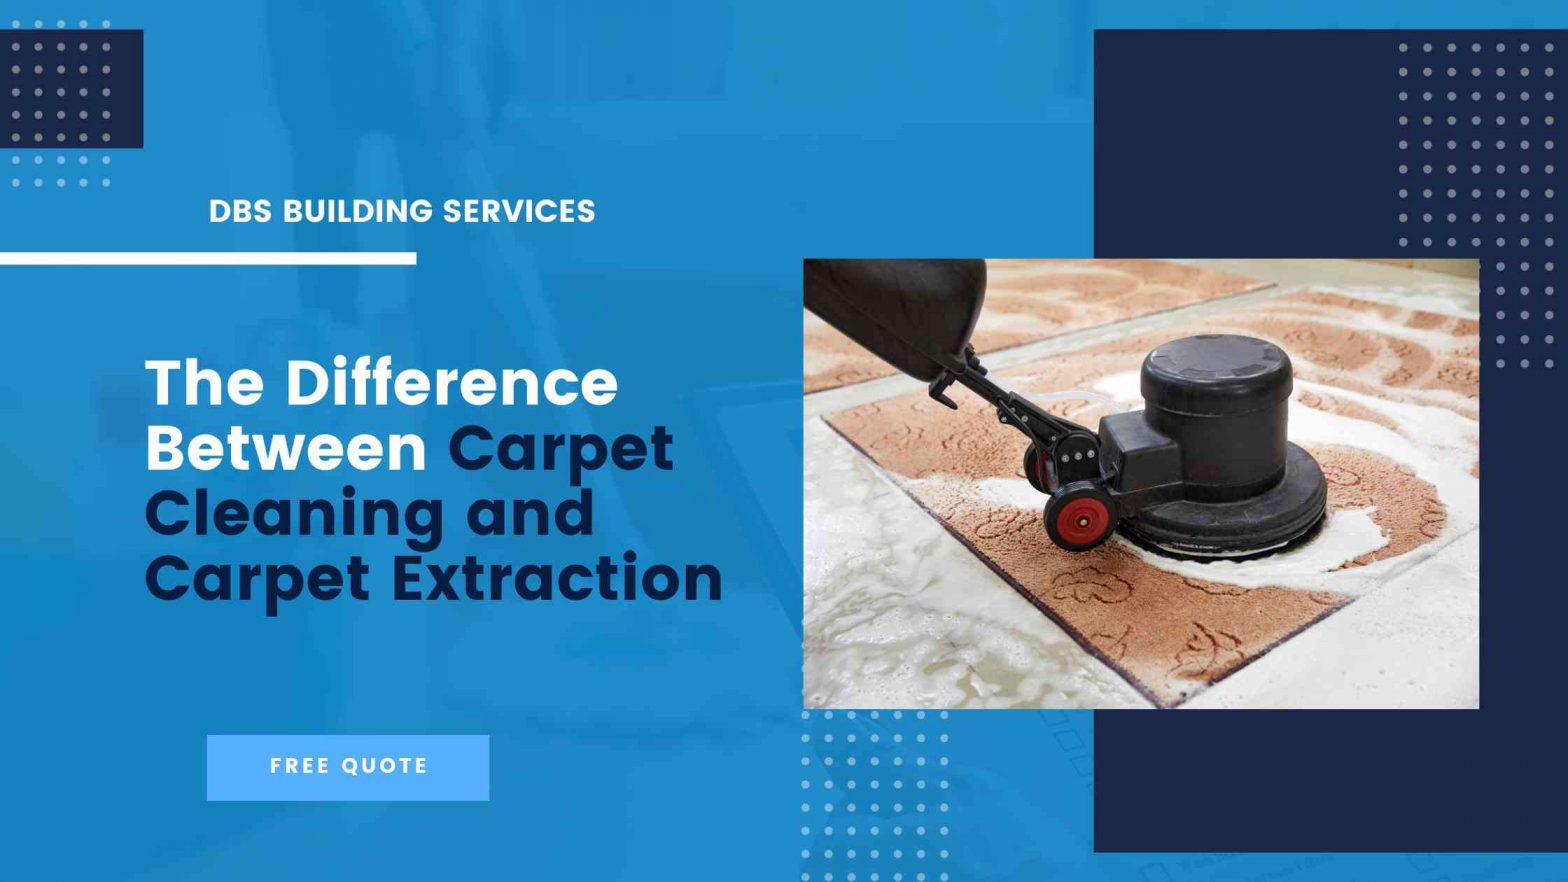 Carpet Cleaning and Carpet Extraction